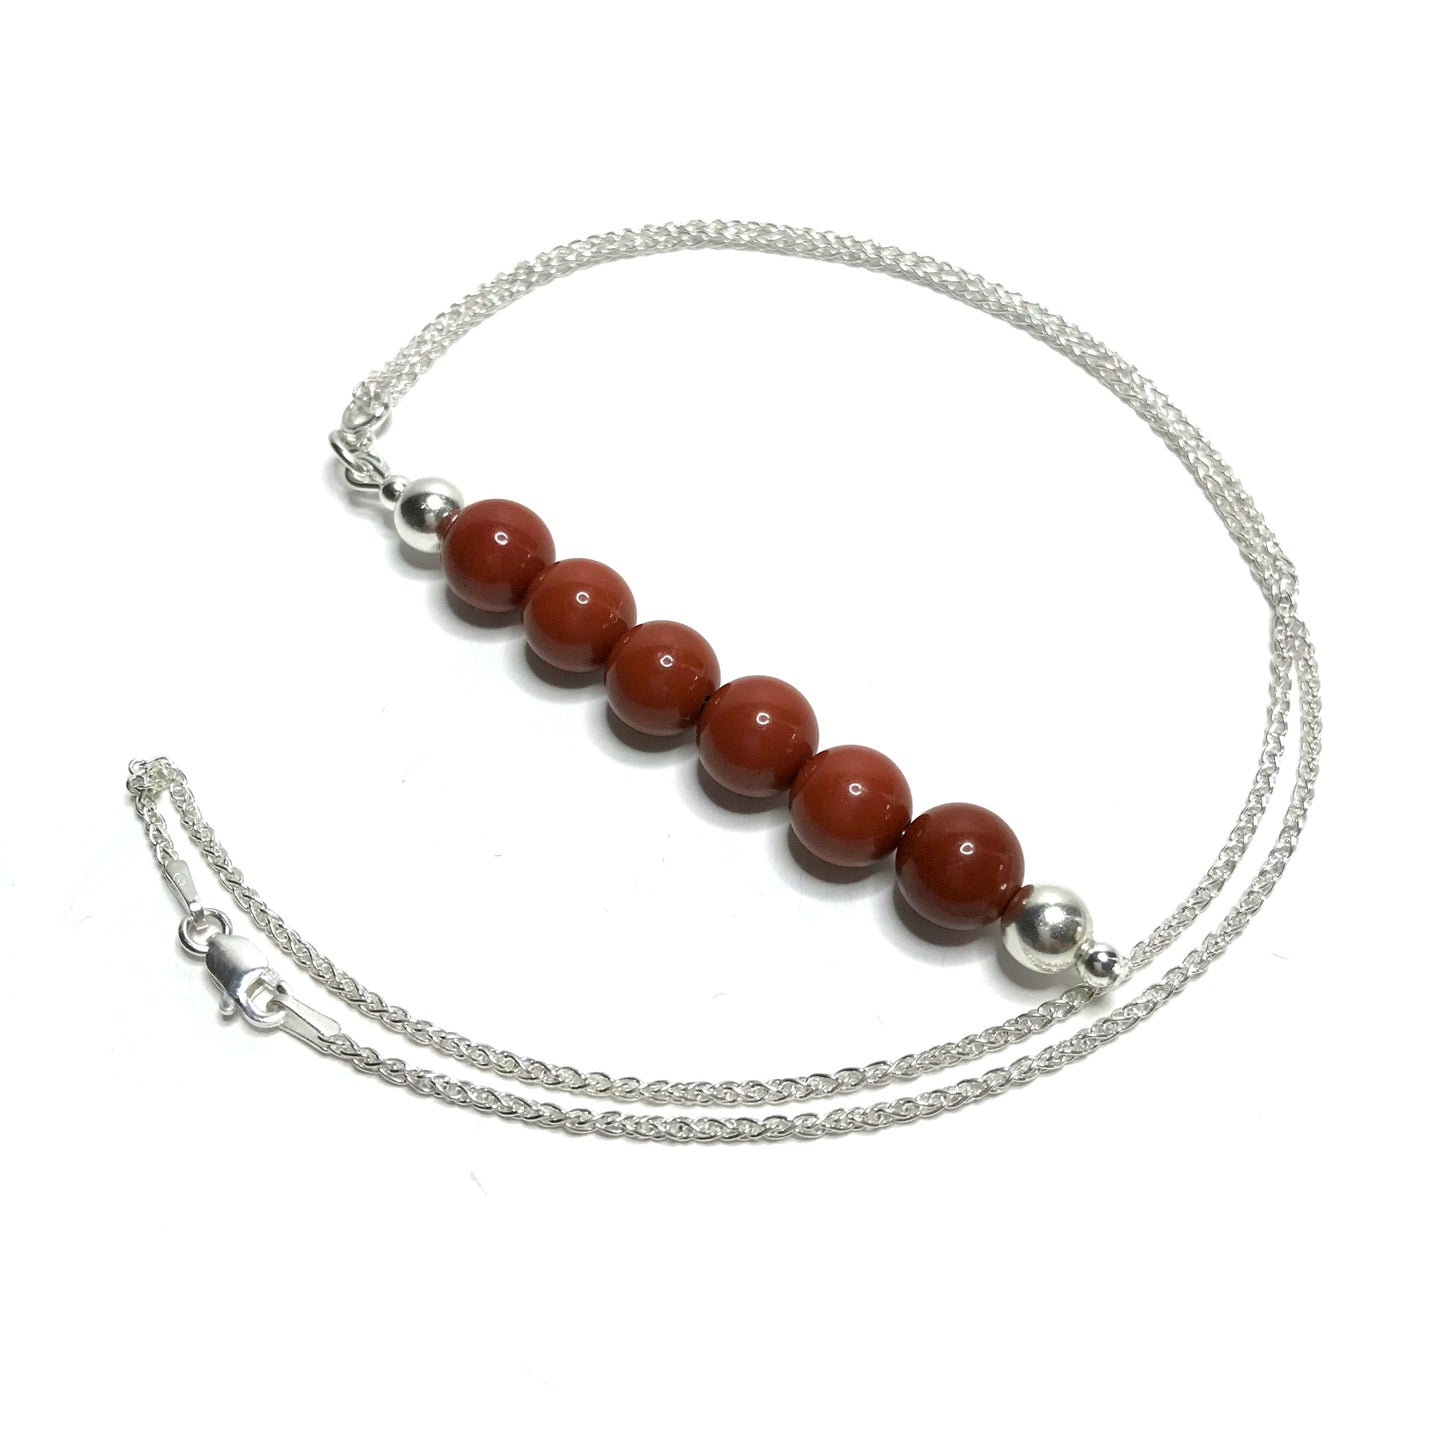 Red jasper pendant necklace with silver chain